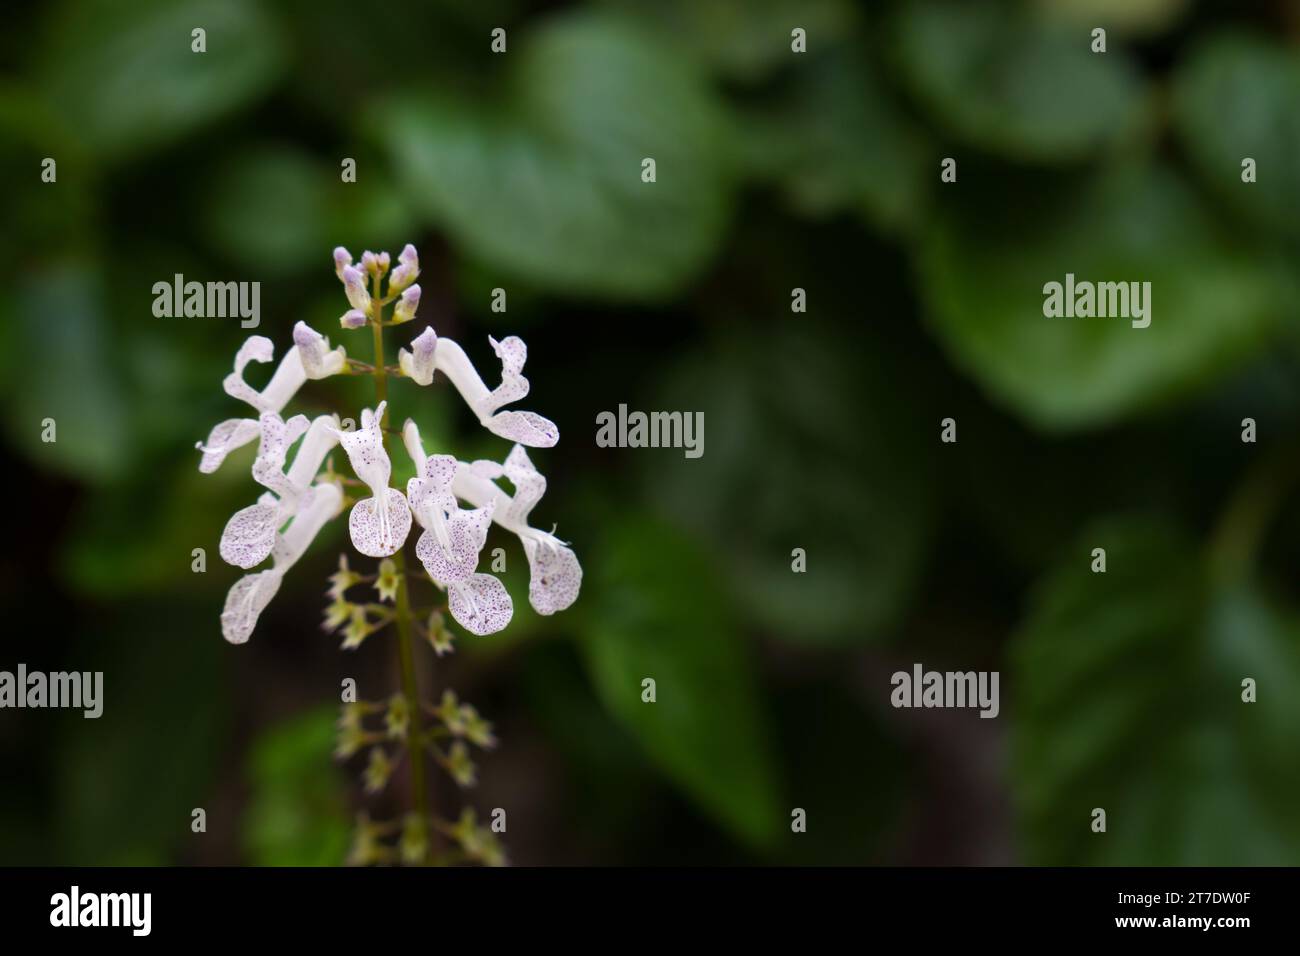 A closeup of the flower of the money plant, Plectranthus verticillatus, in the foreground Stock Photo